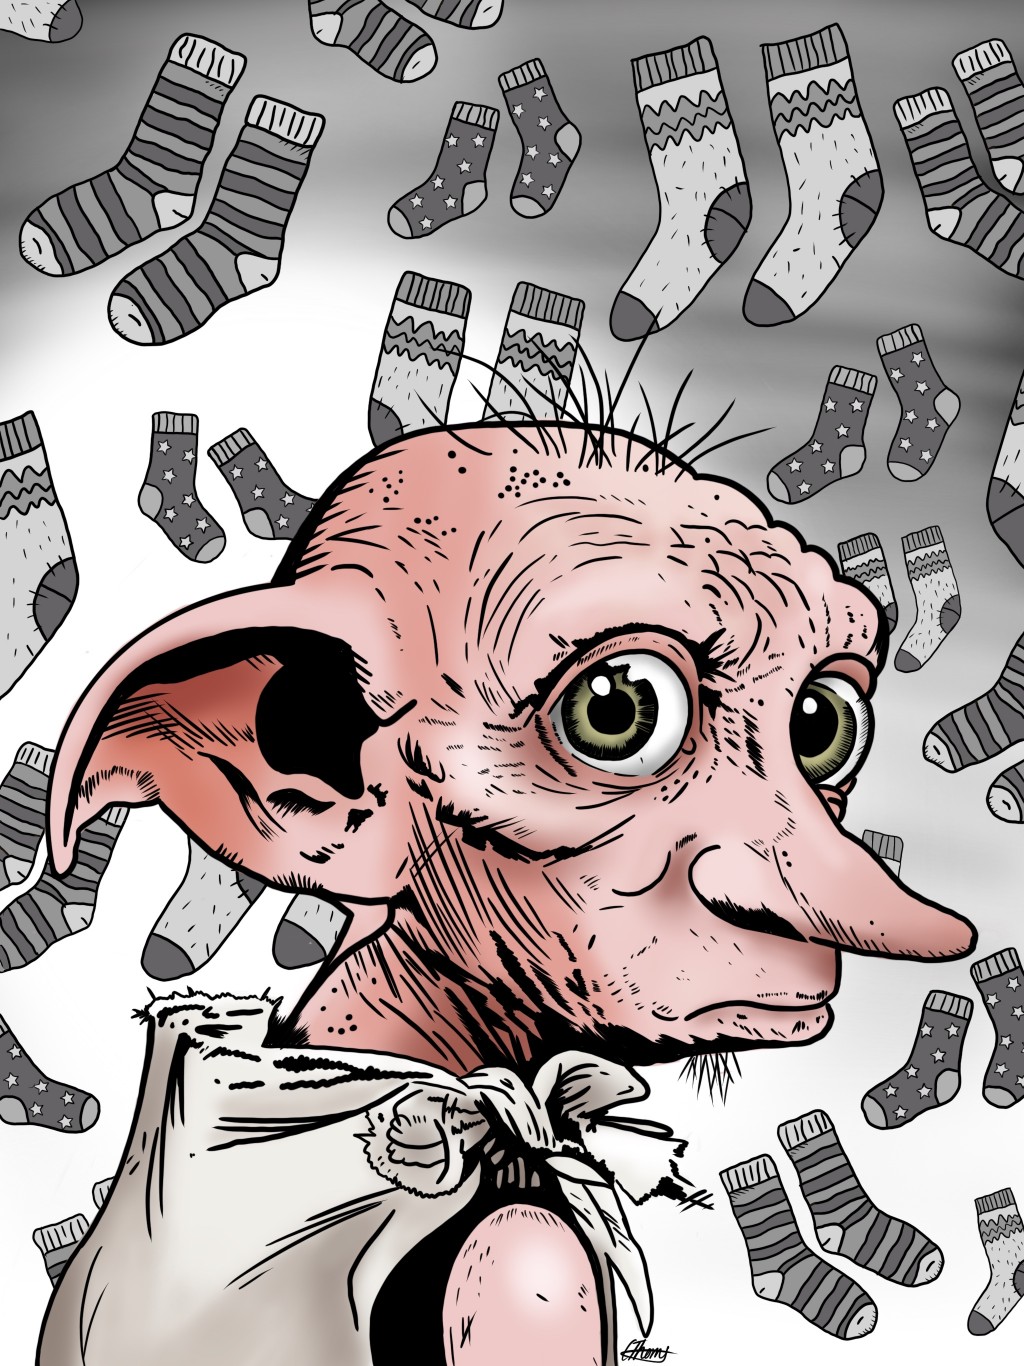 Dobby from Harry Potter pencil drawing by Laco13 on DeviantArt